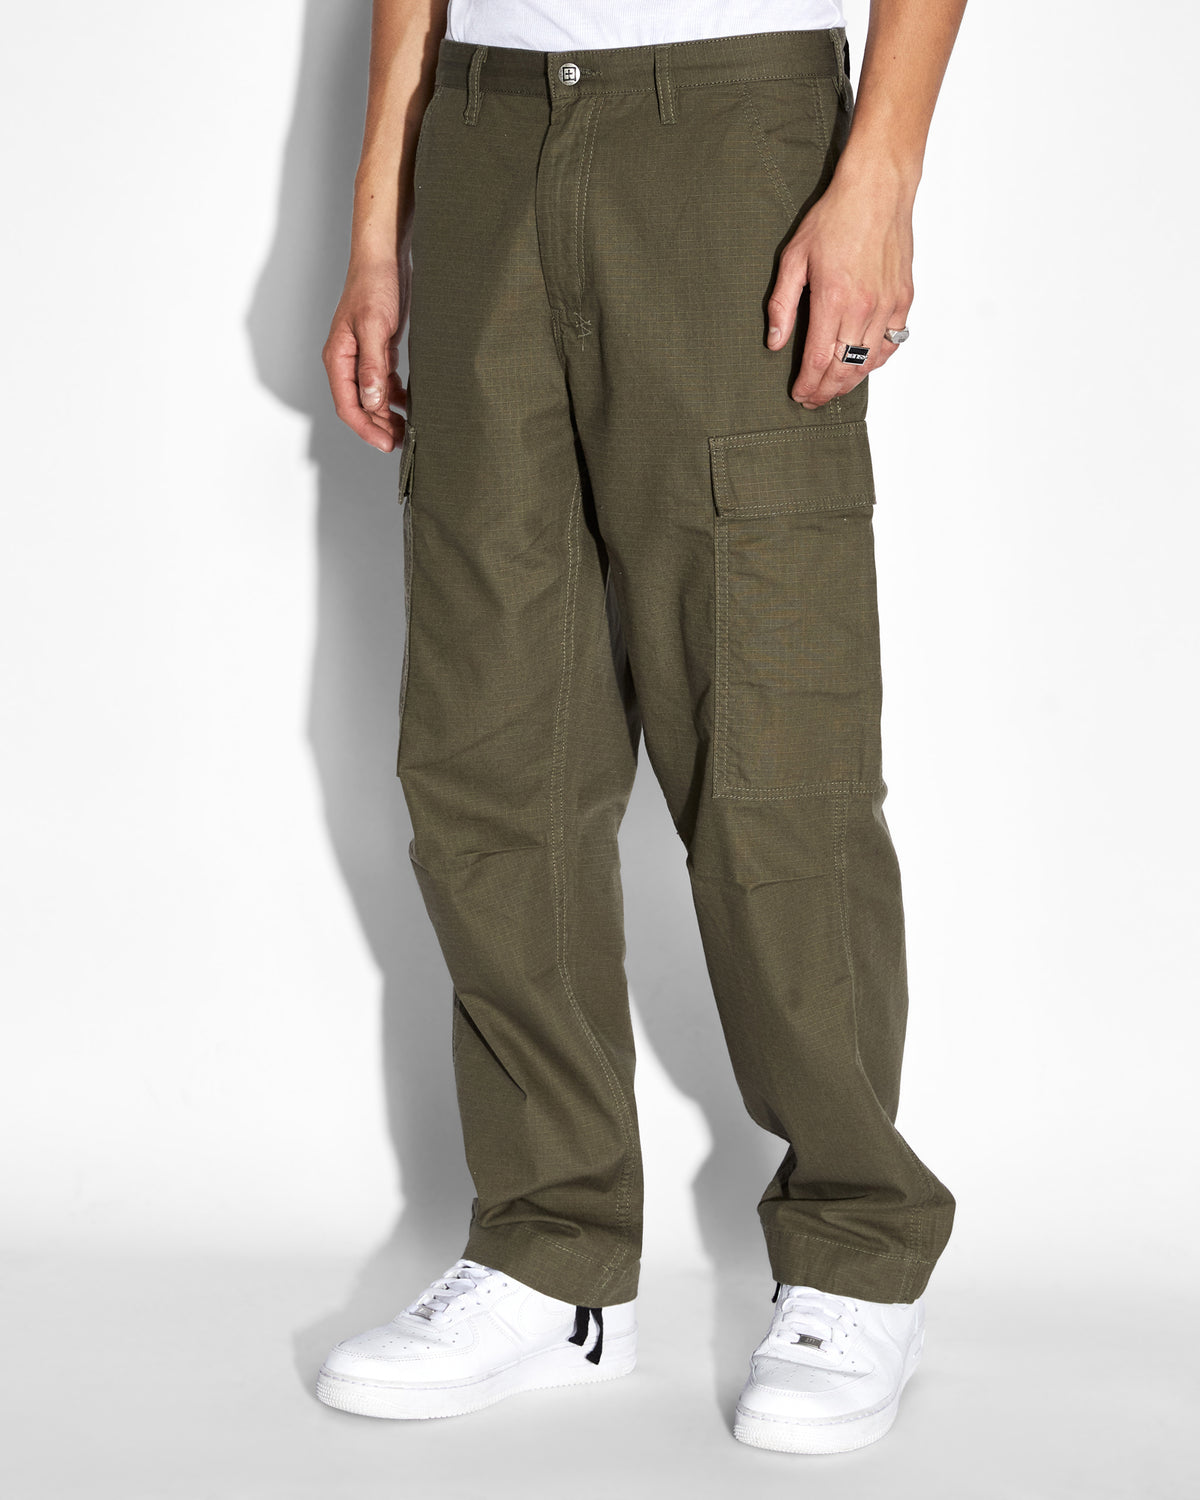 Wasted Youth CARGO PANTS OLIVE DRAB XL - ワークパンツ/カーゴパンツ